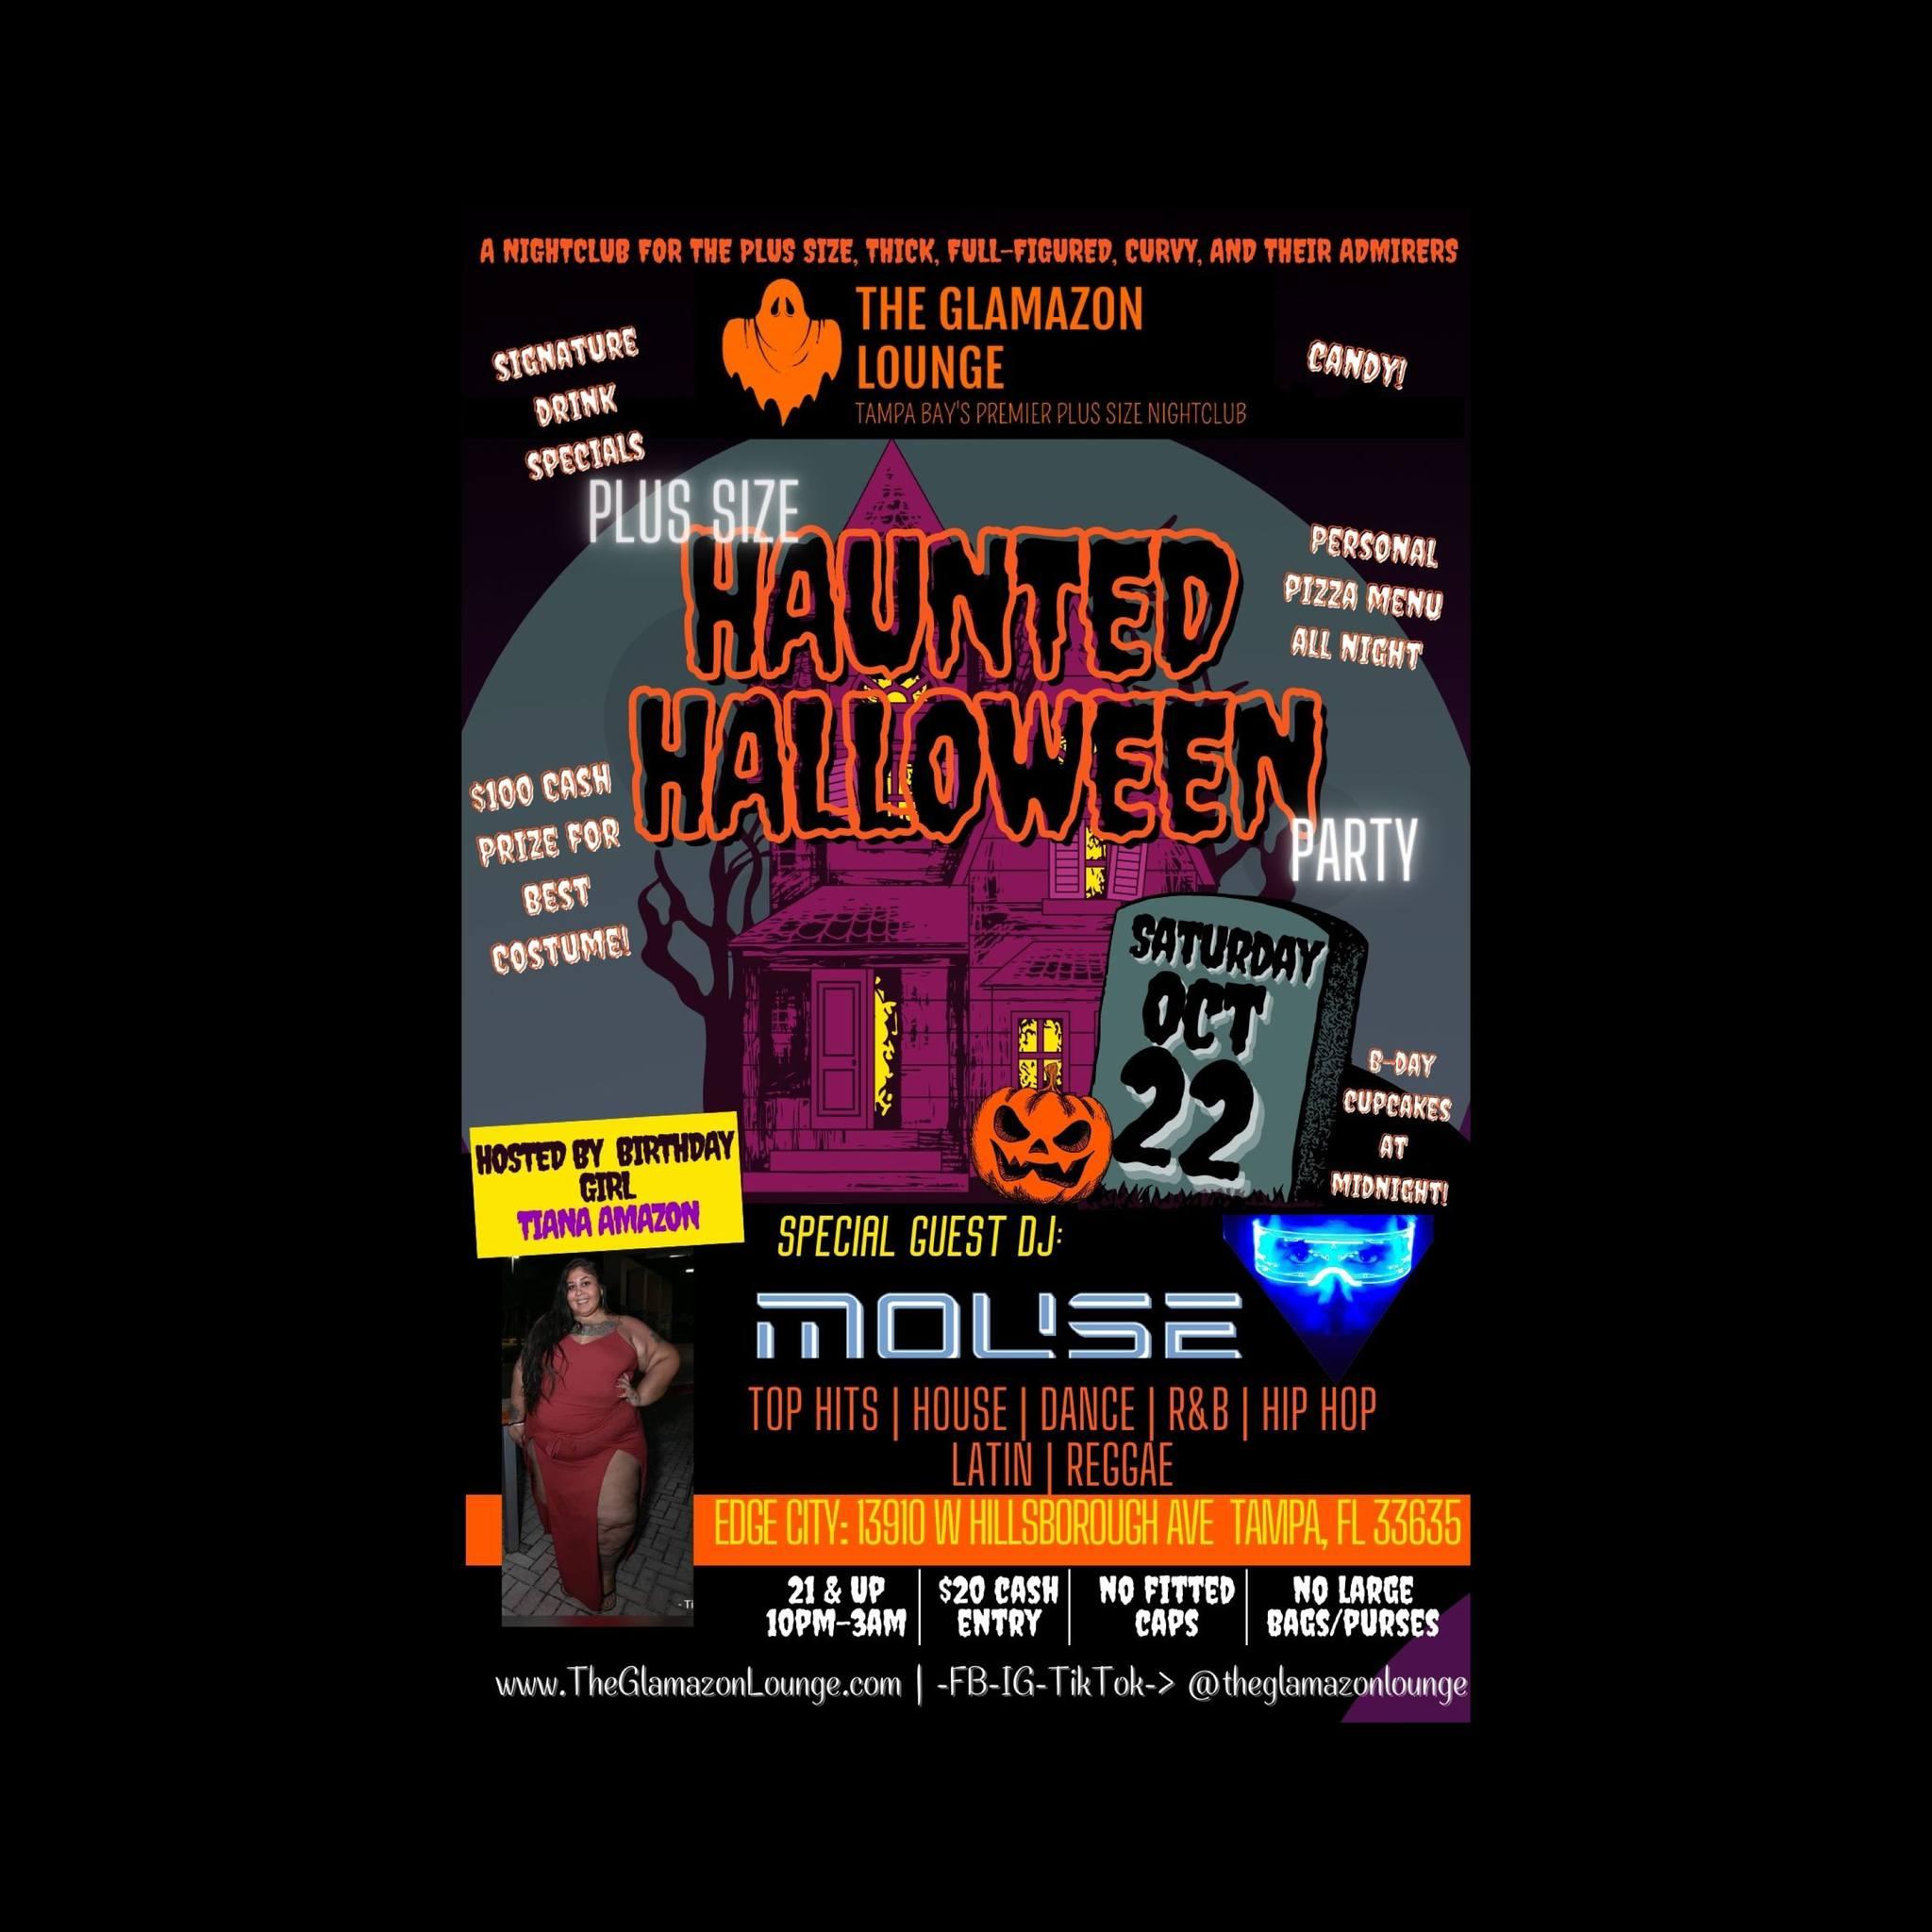 Plus Size Haunted Halloween Party :: Tampa, FL
Sat Oct 22, 10:00 PM - Sun Oct 23, 3:00 AM
in 2 days